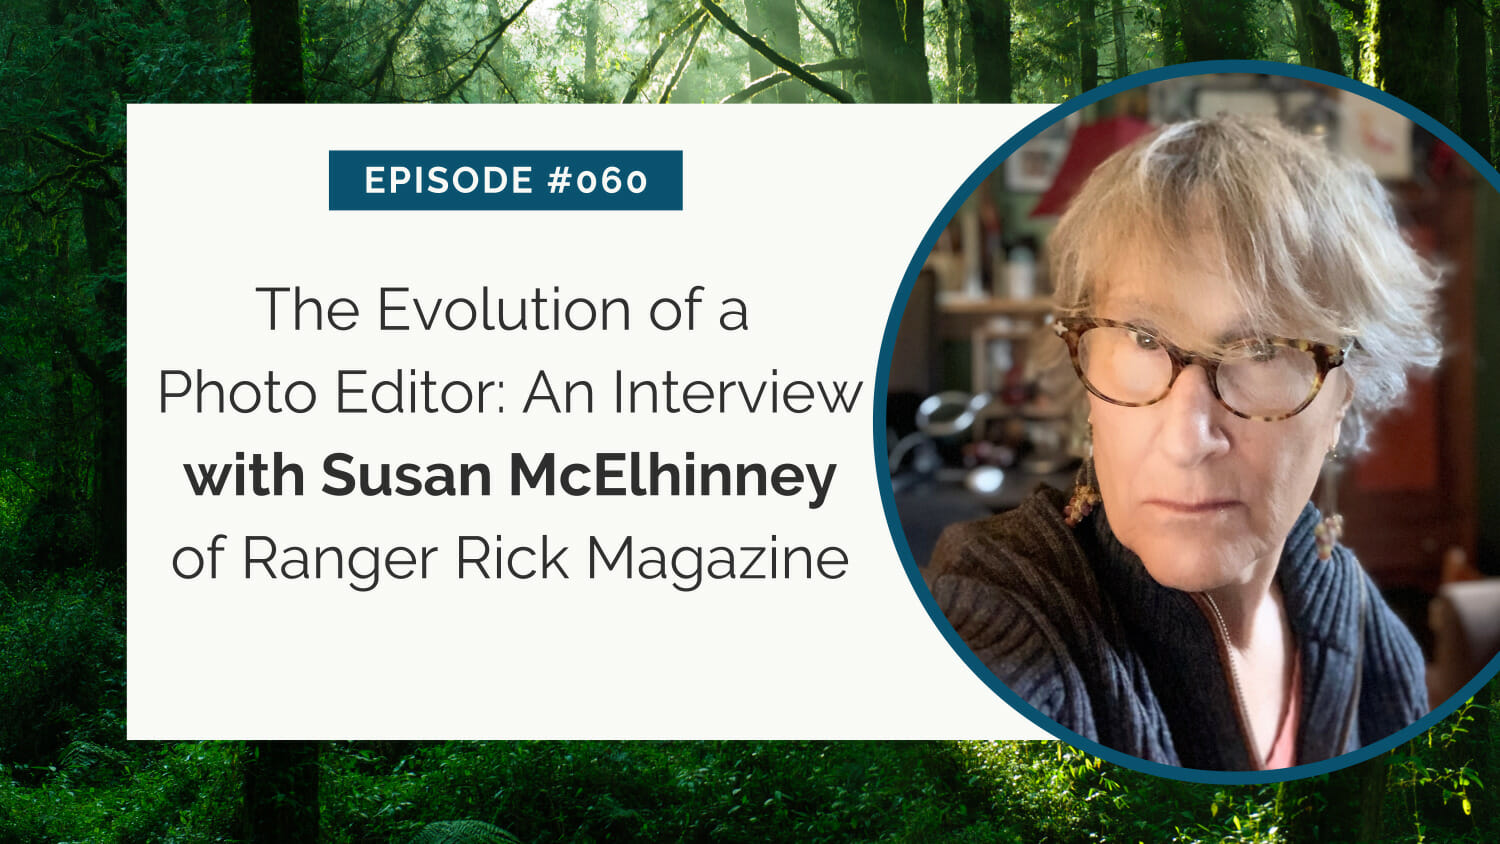 Episode #060: the evolution of a photo editor - an interview with susan mcelhinney of ranger rick magazine, featuring a portrait of susan mcelhinney.